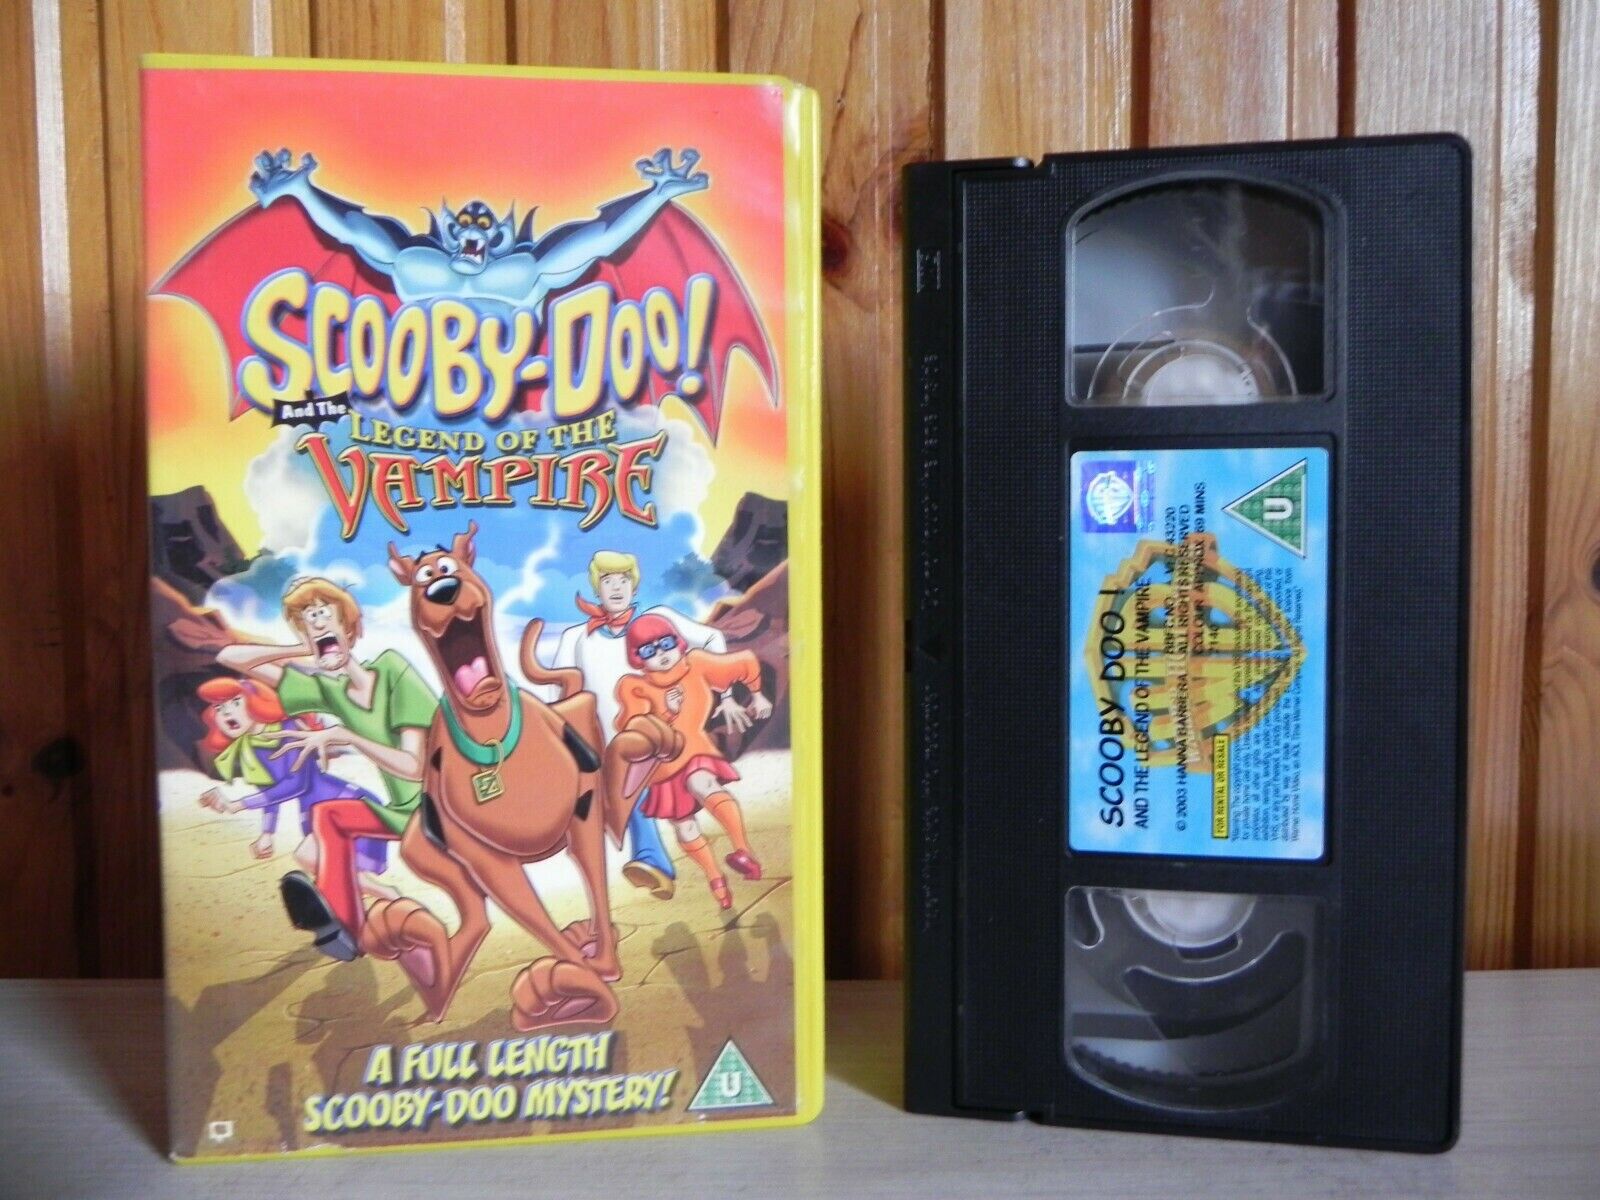 Scooby-Doo And The Legend Of The Vampire - All-New Adventure - Cartoon - Pal VHS-